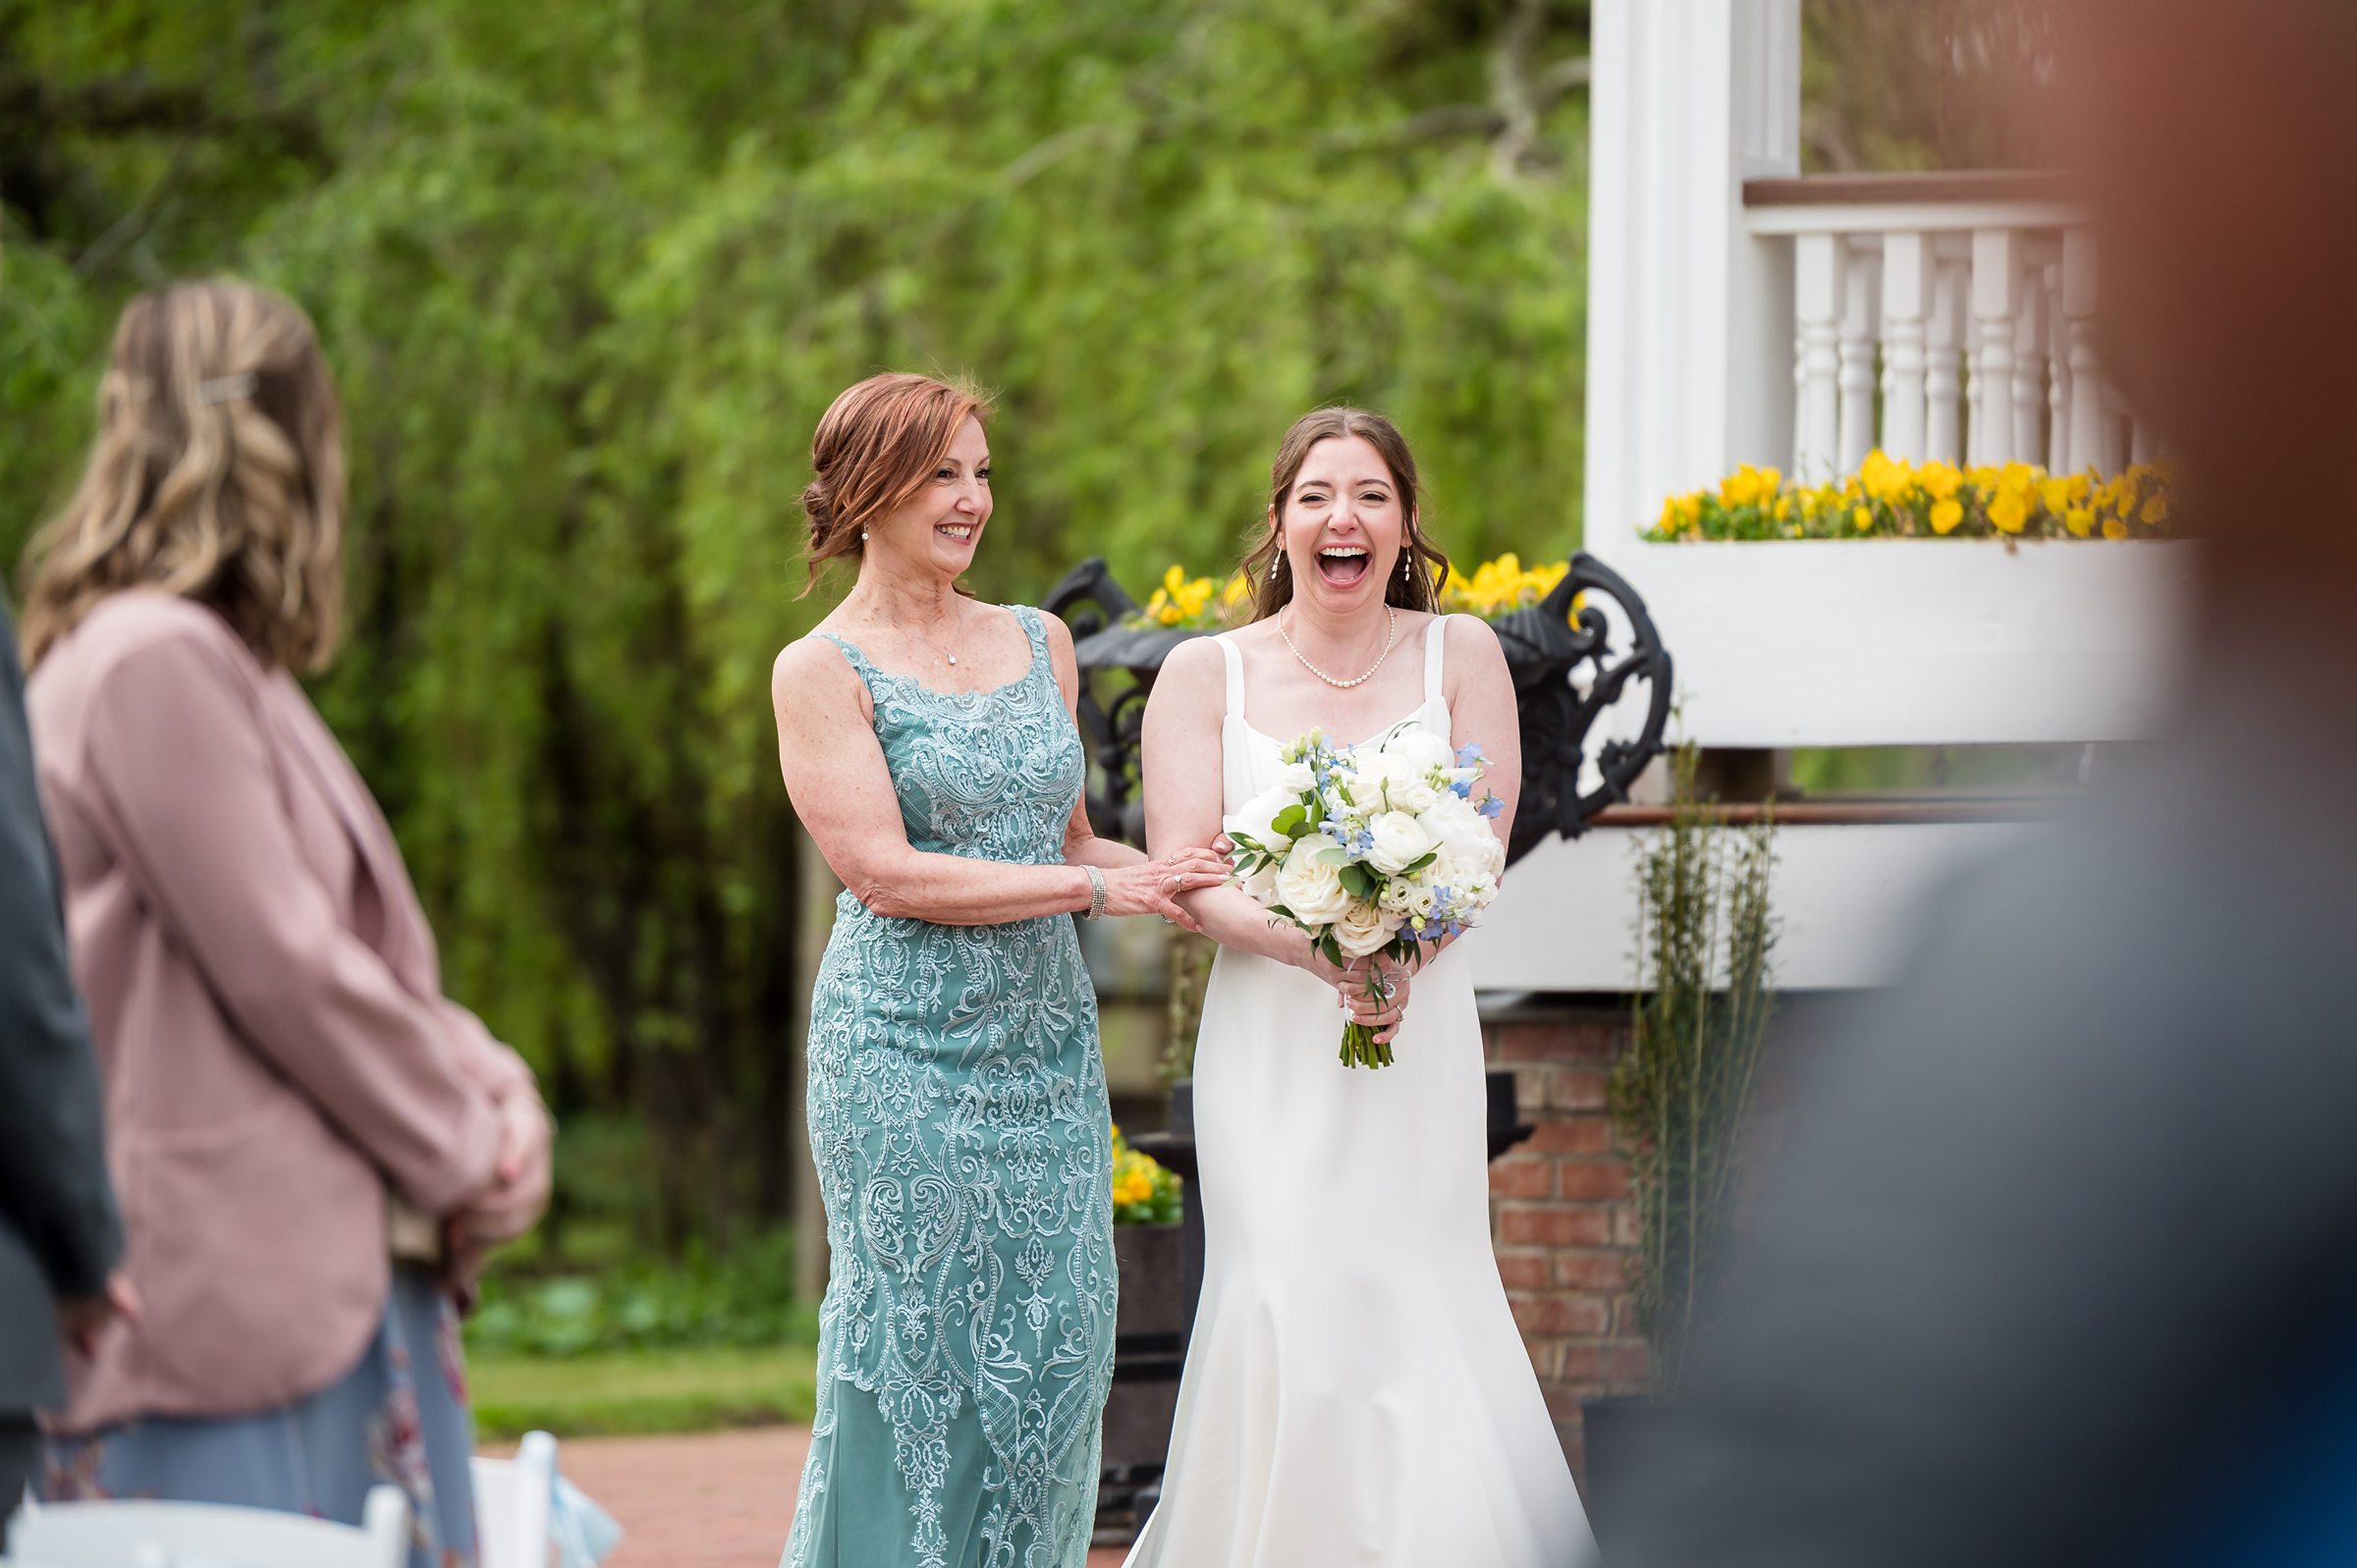 A bride in a white dress and a woman in a teal dress walk down an outdoor aisle, both smiling broadly.